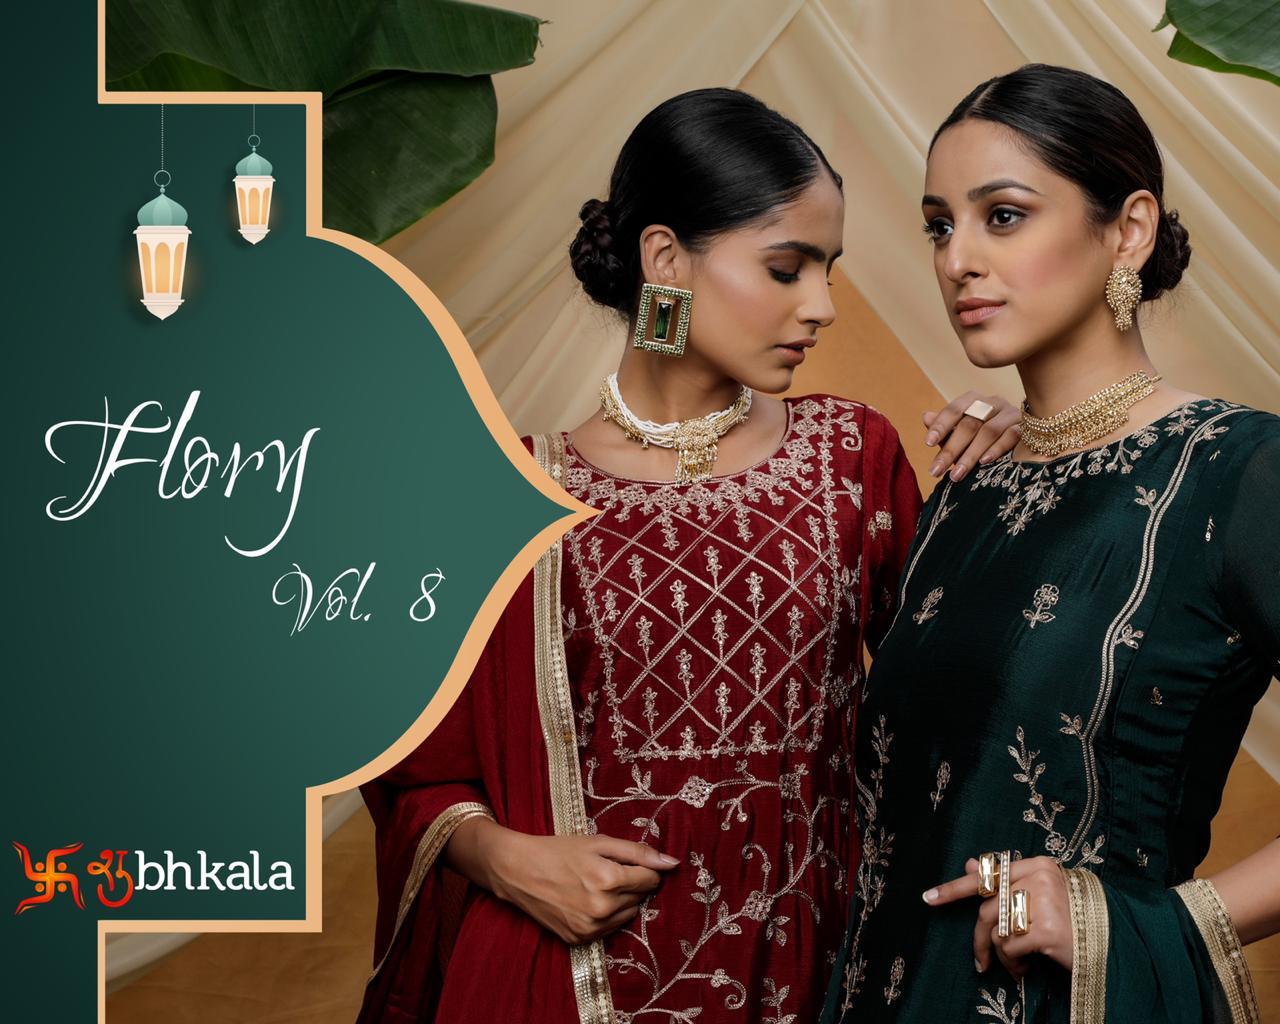 Shubhkala Flory Vol 8 Designer Embroidery Work Suits Wholesale